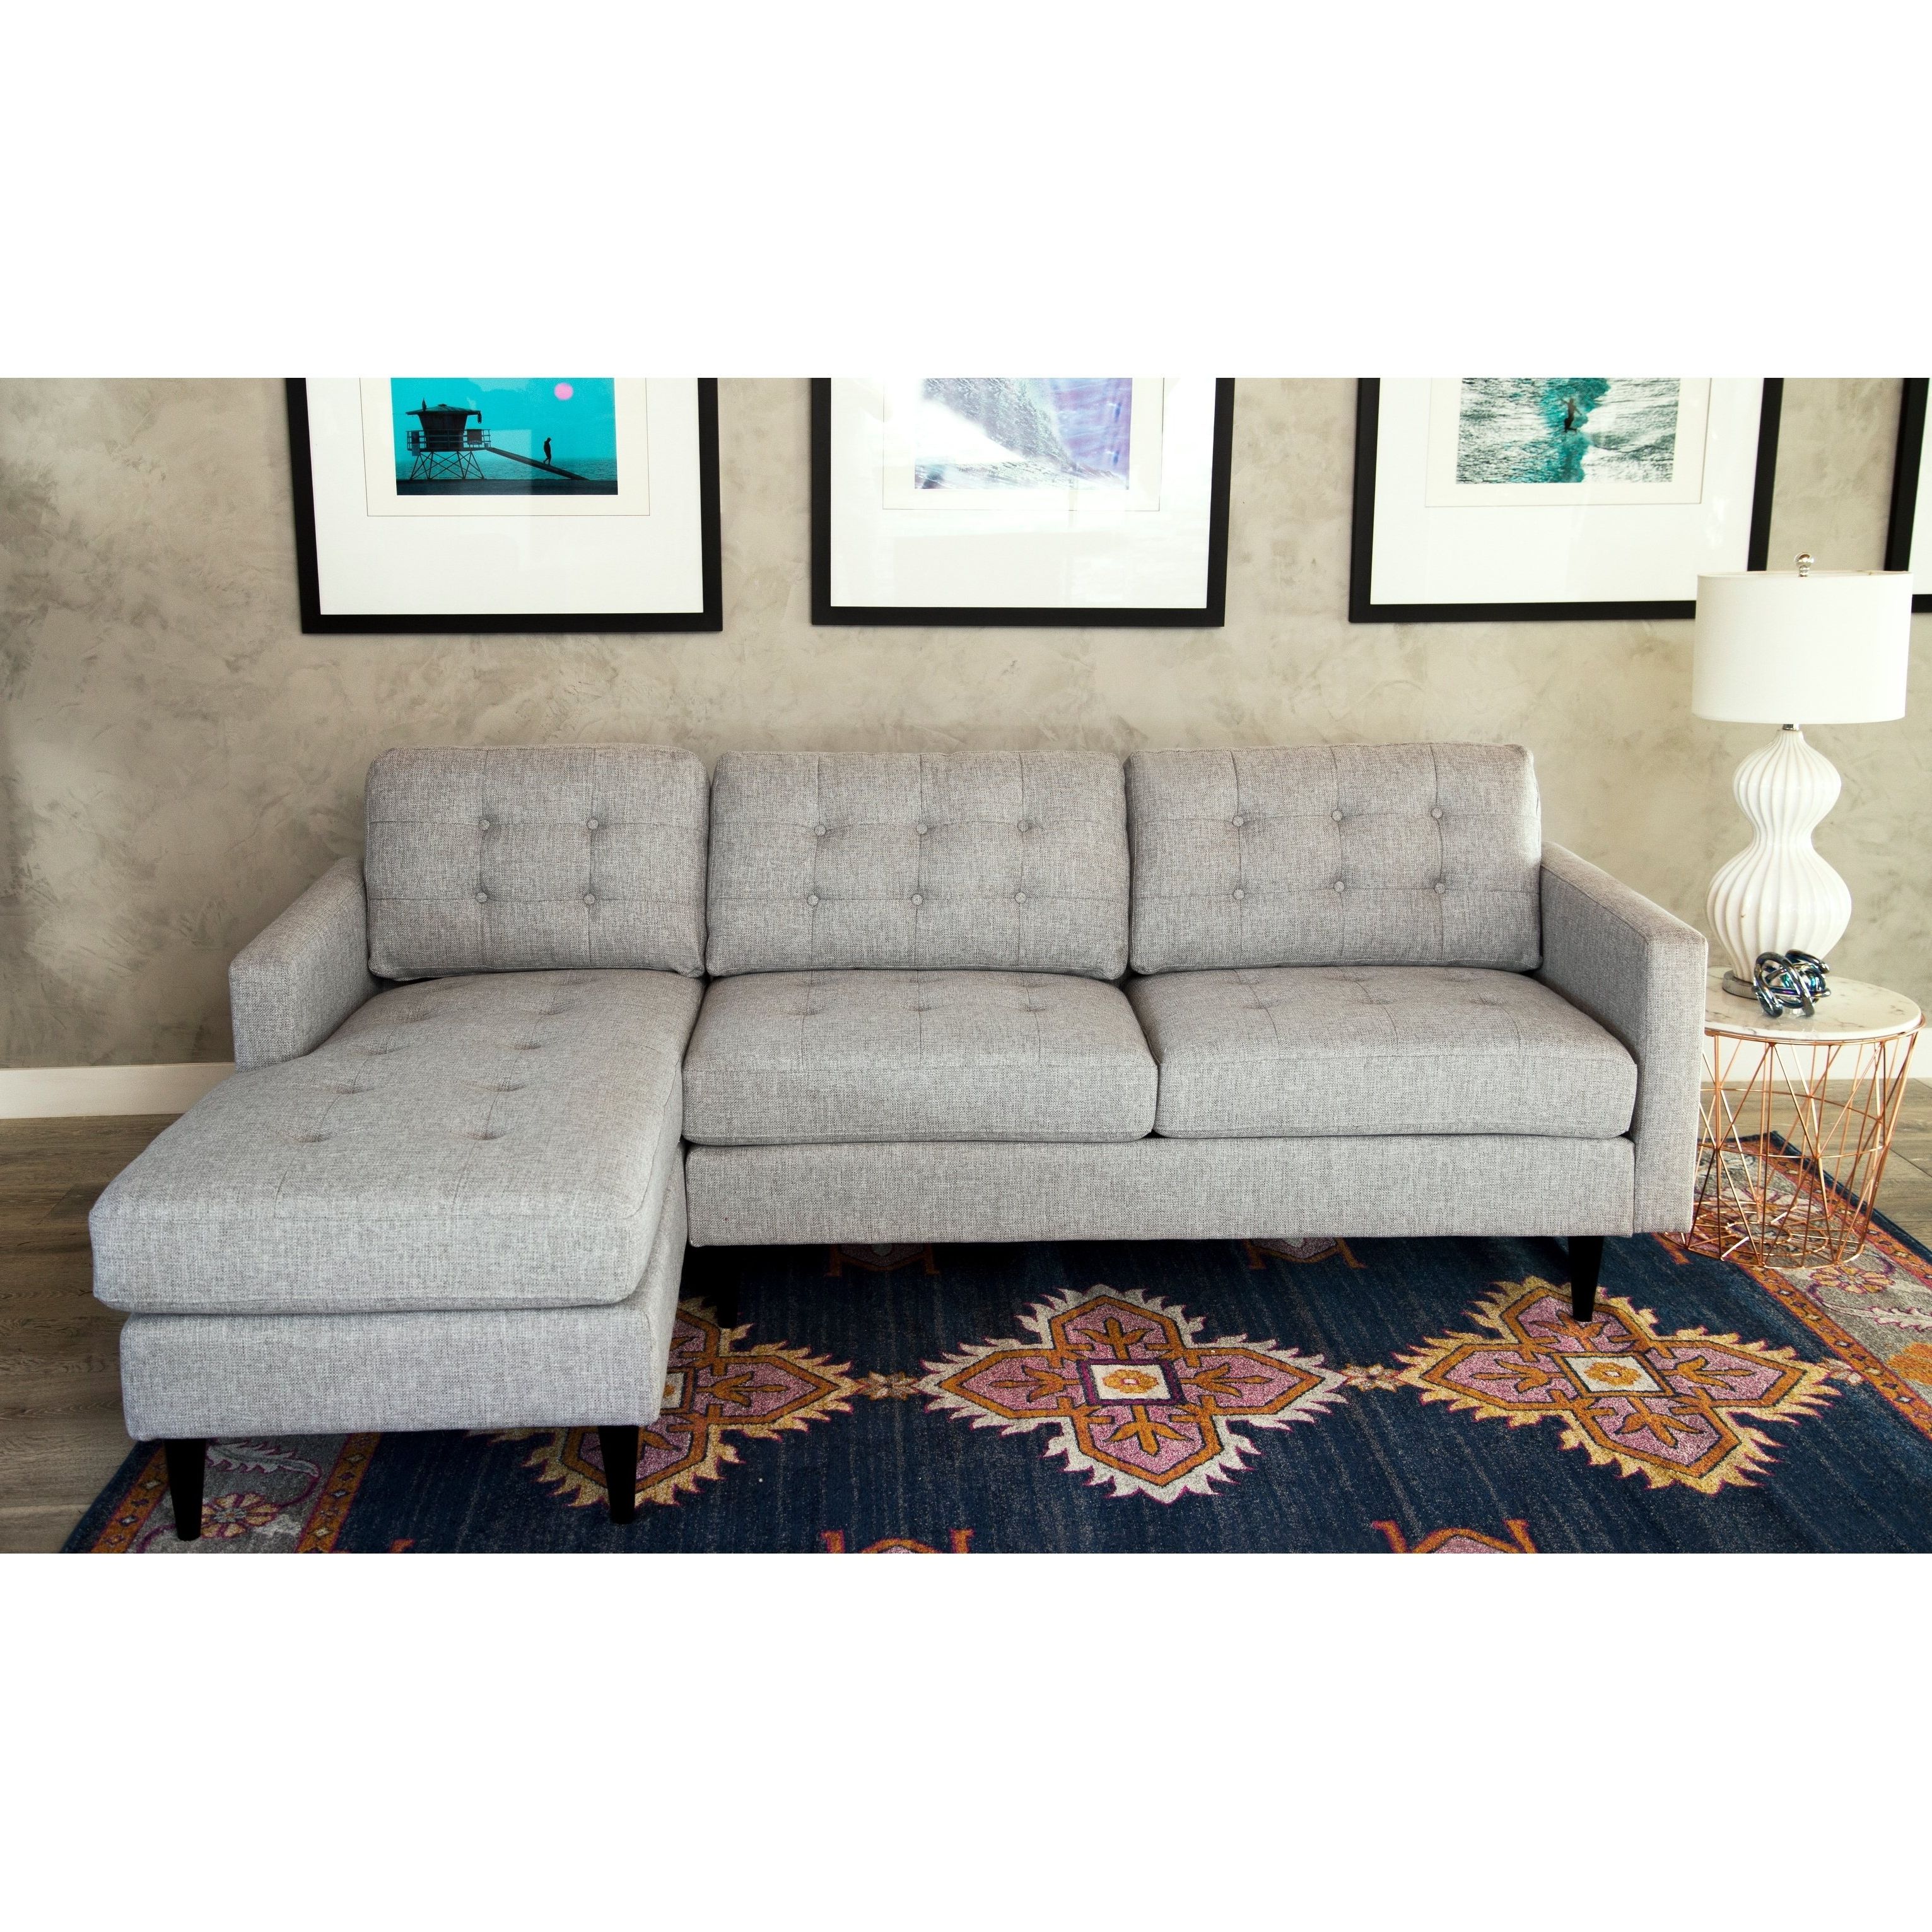 Preferred Aidan 4 Piece Sectionals Inside Shop Abbyson Aiden Grey Mid Century Tufted Sectional – On Sale (View 20 of 20)